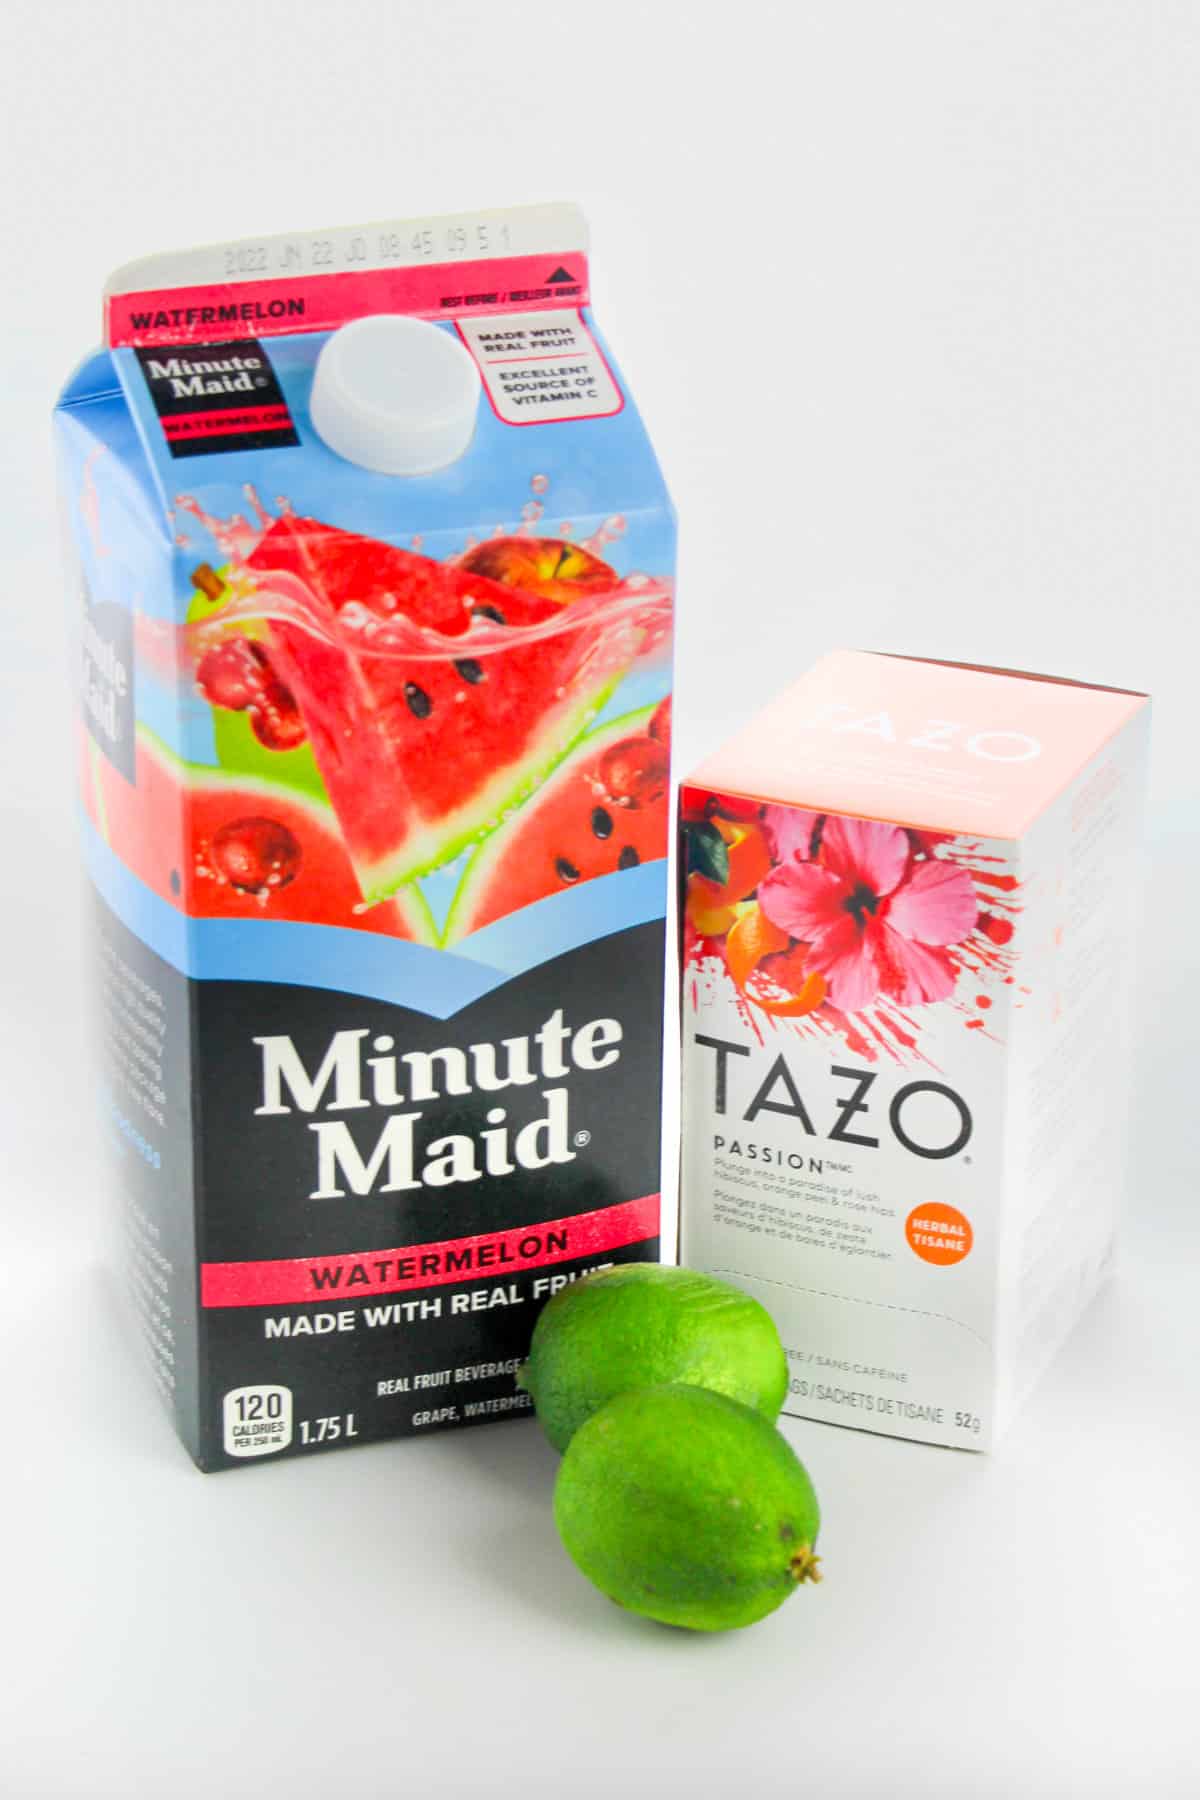 Minute Maid Watermelon Jucie, Tazo Passion herbal tea, and two limes.